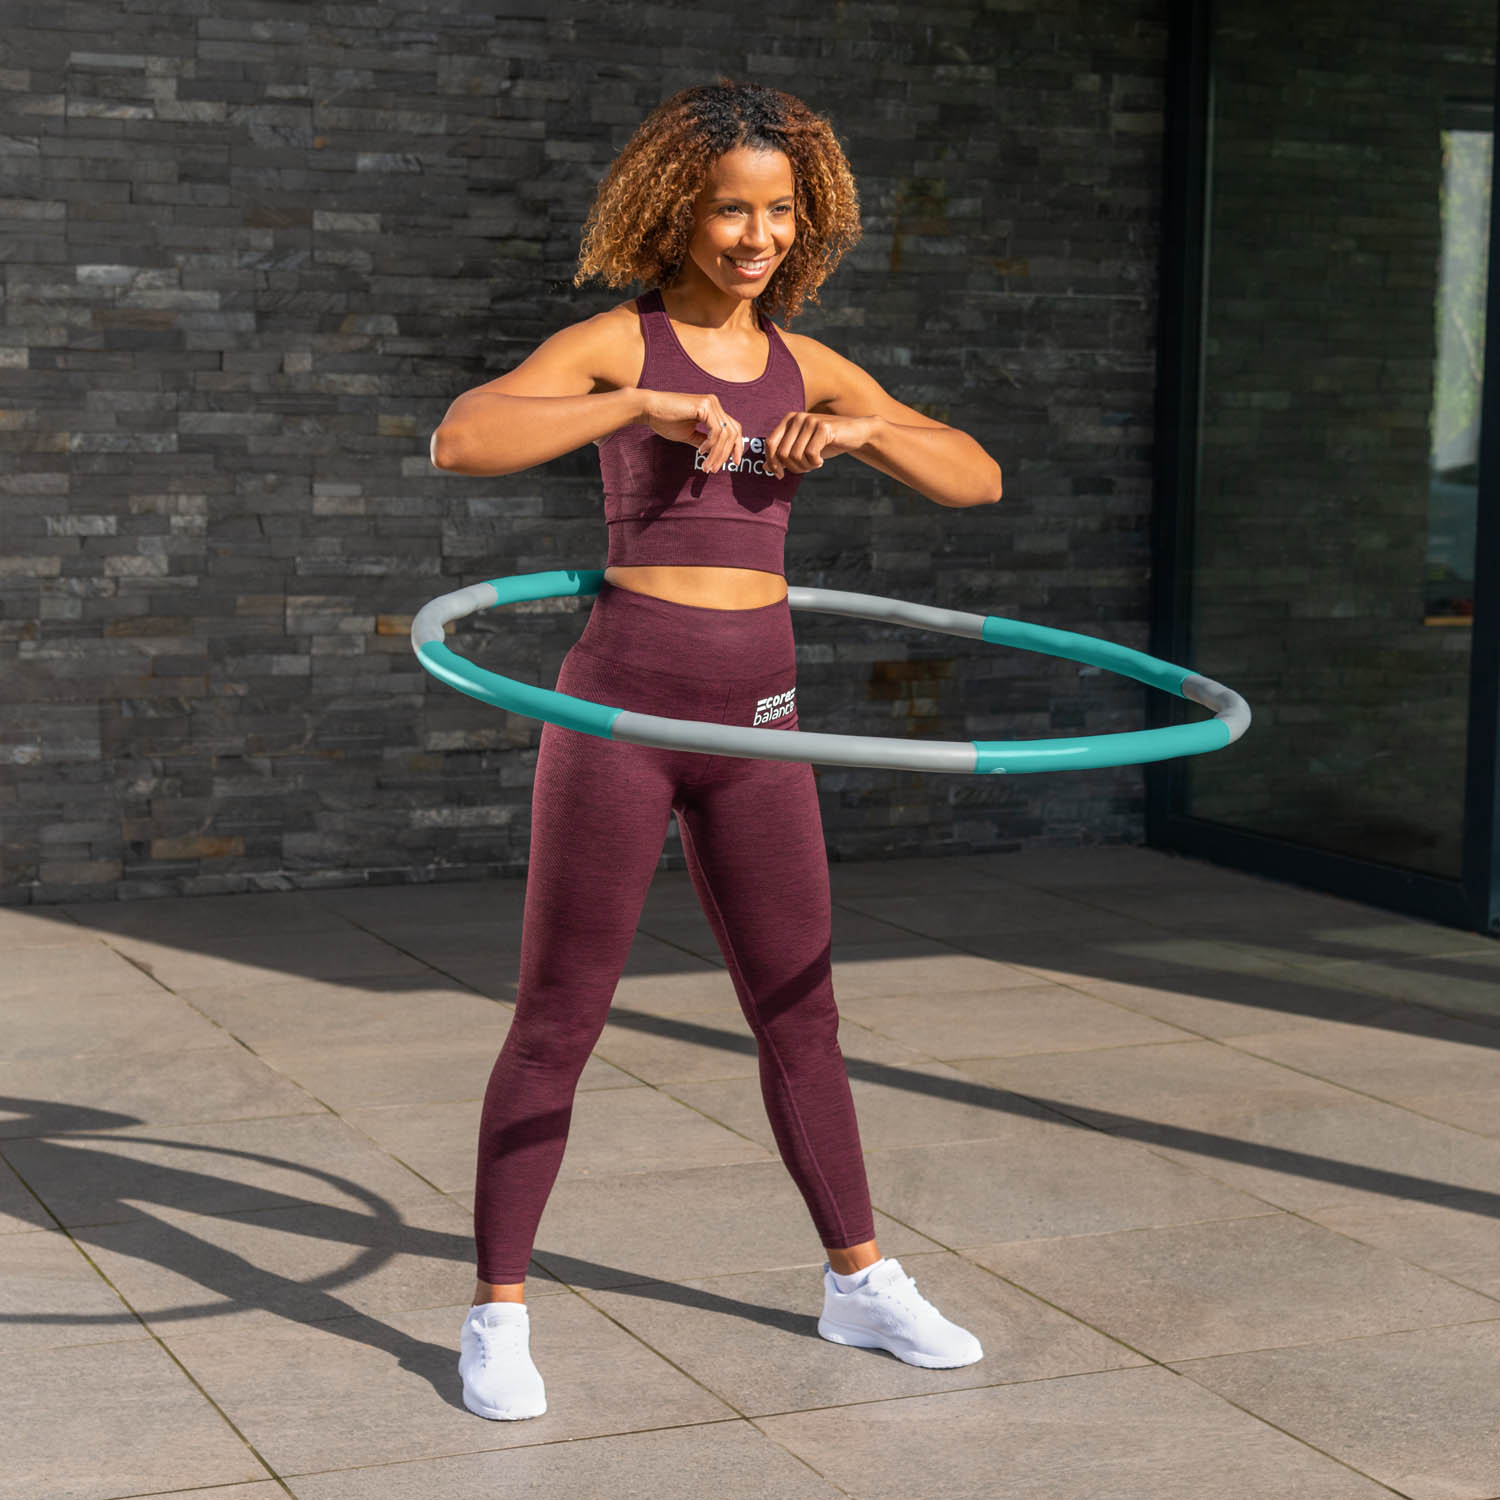 587938_weighted_hula_hoop_teal_lifestyle_2